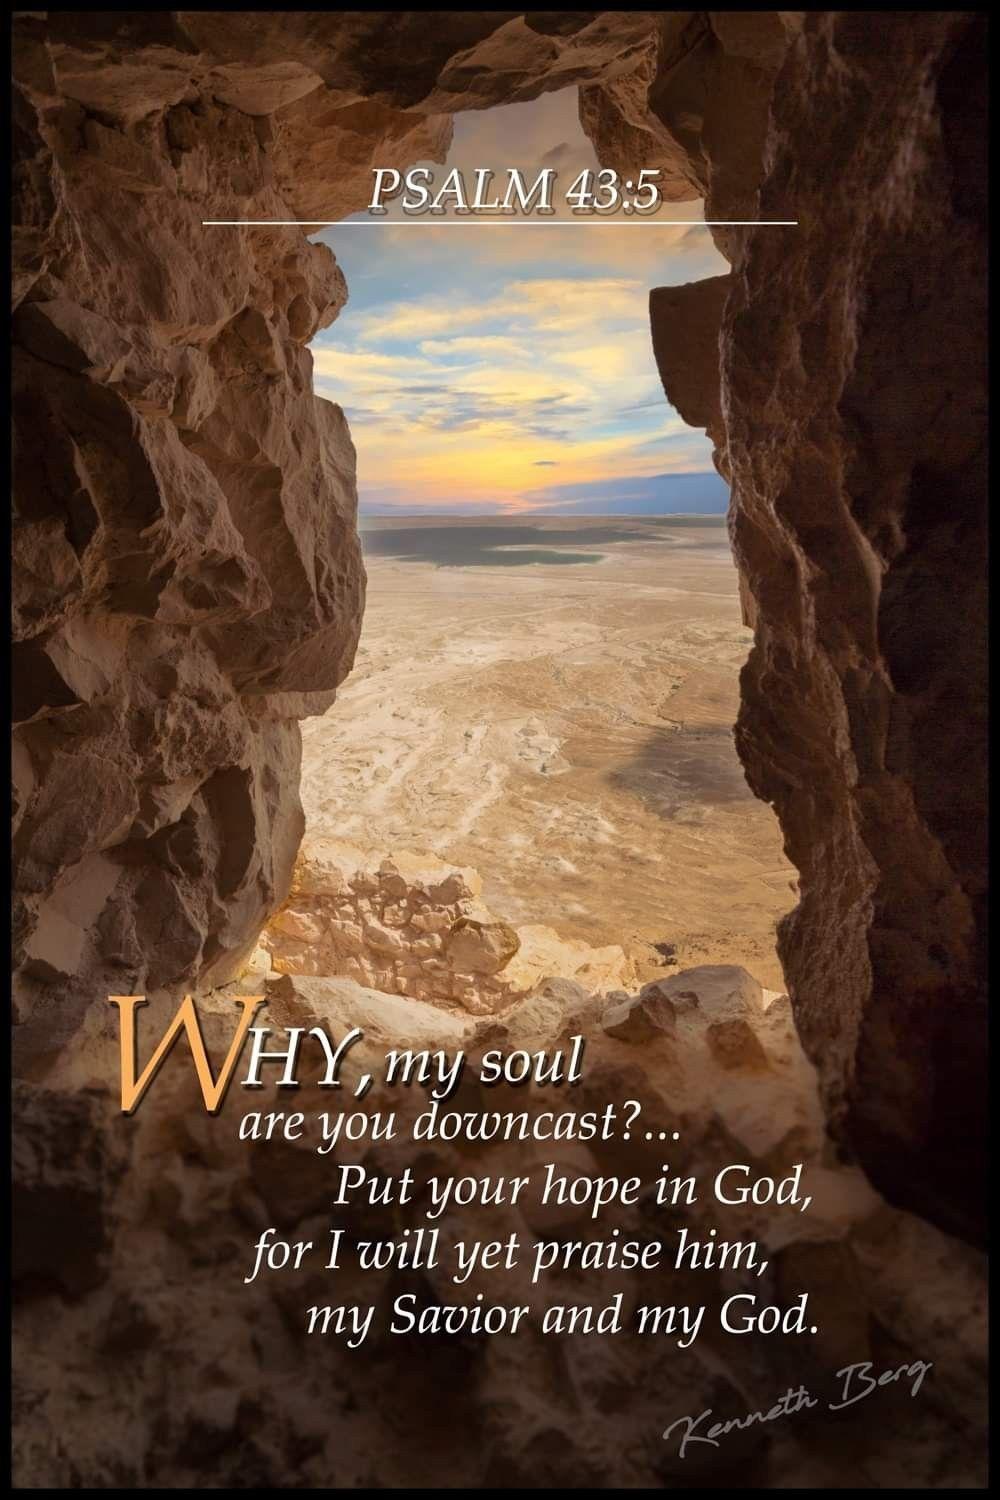 Pin by Martha Lowrey on A Christian Inspiration | Hope in god, Psalm 43:5, Christian pictures